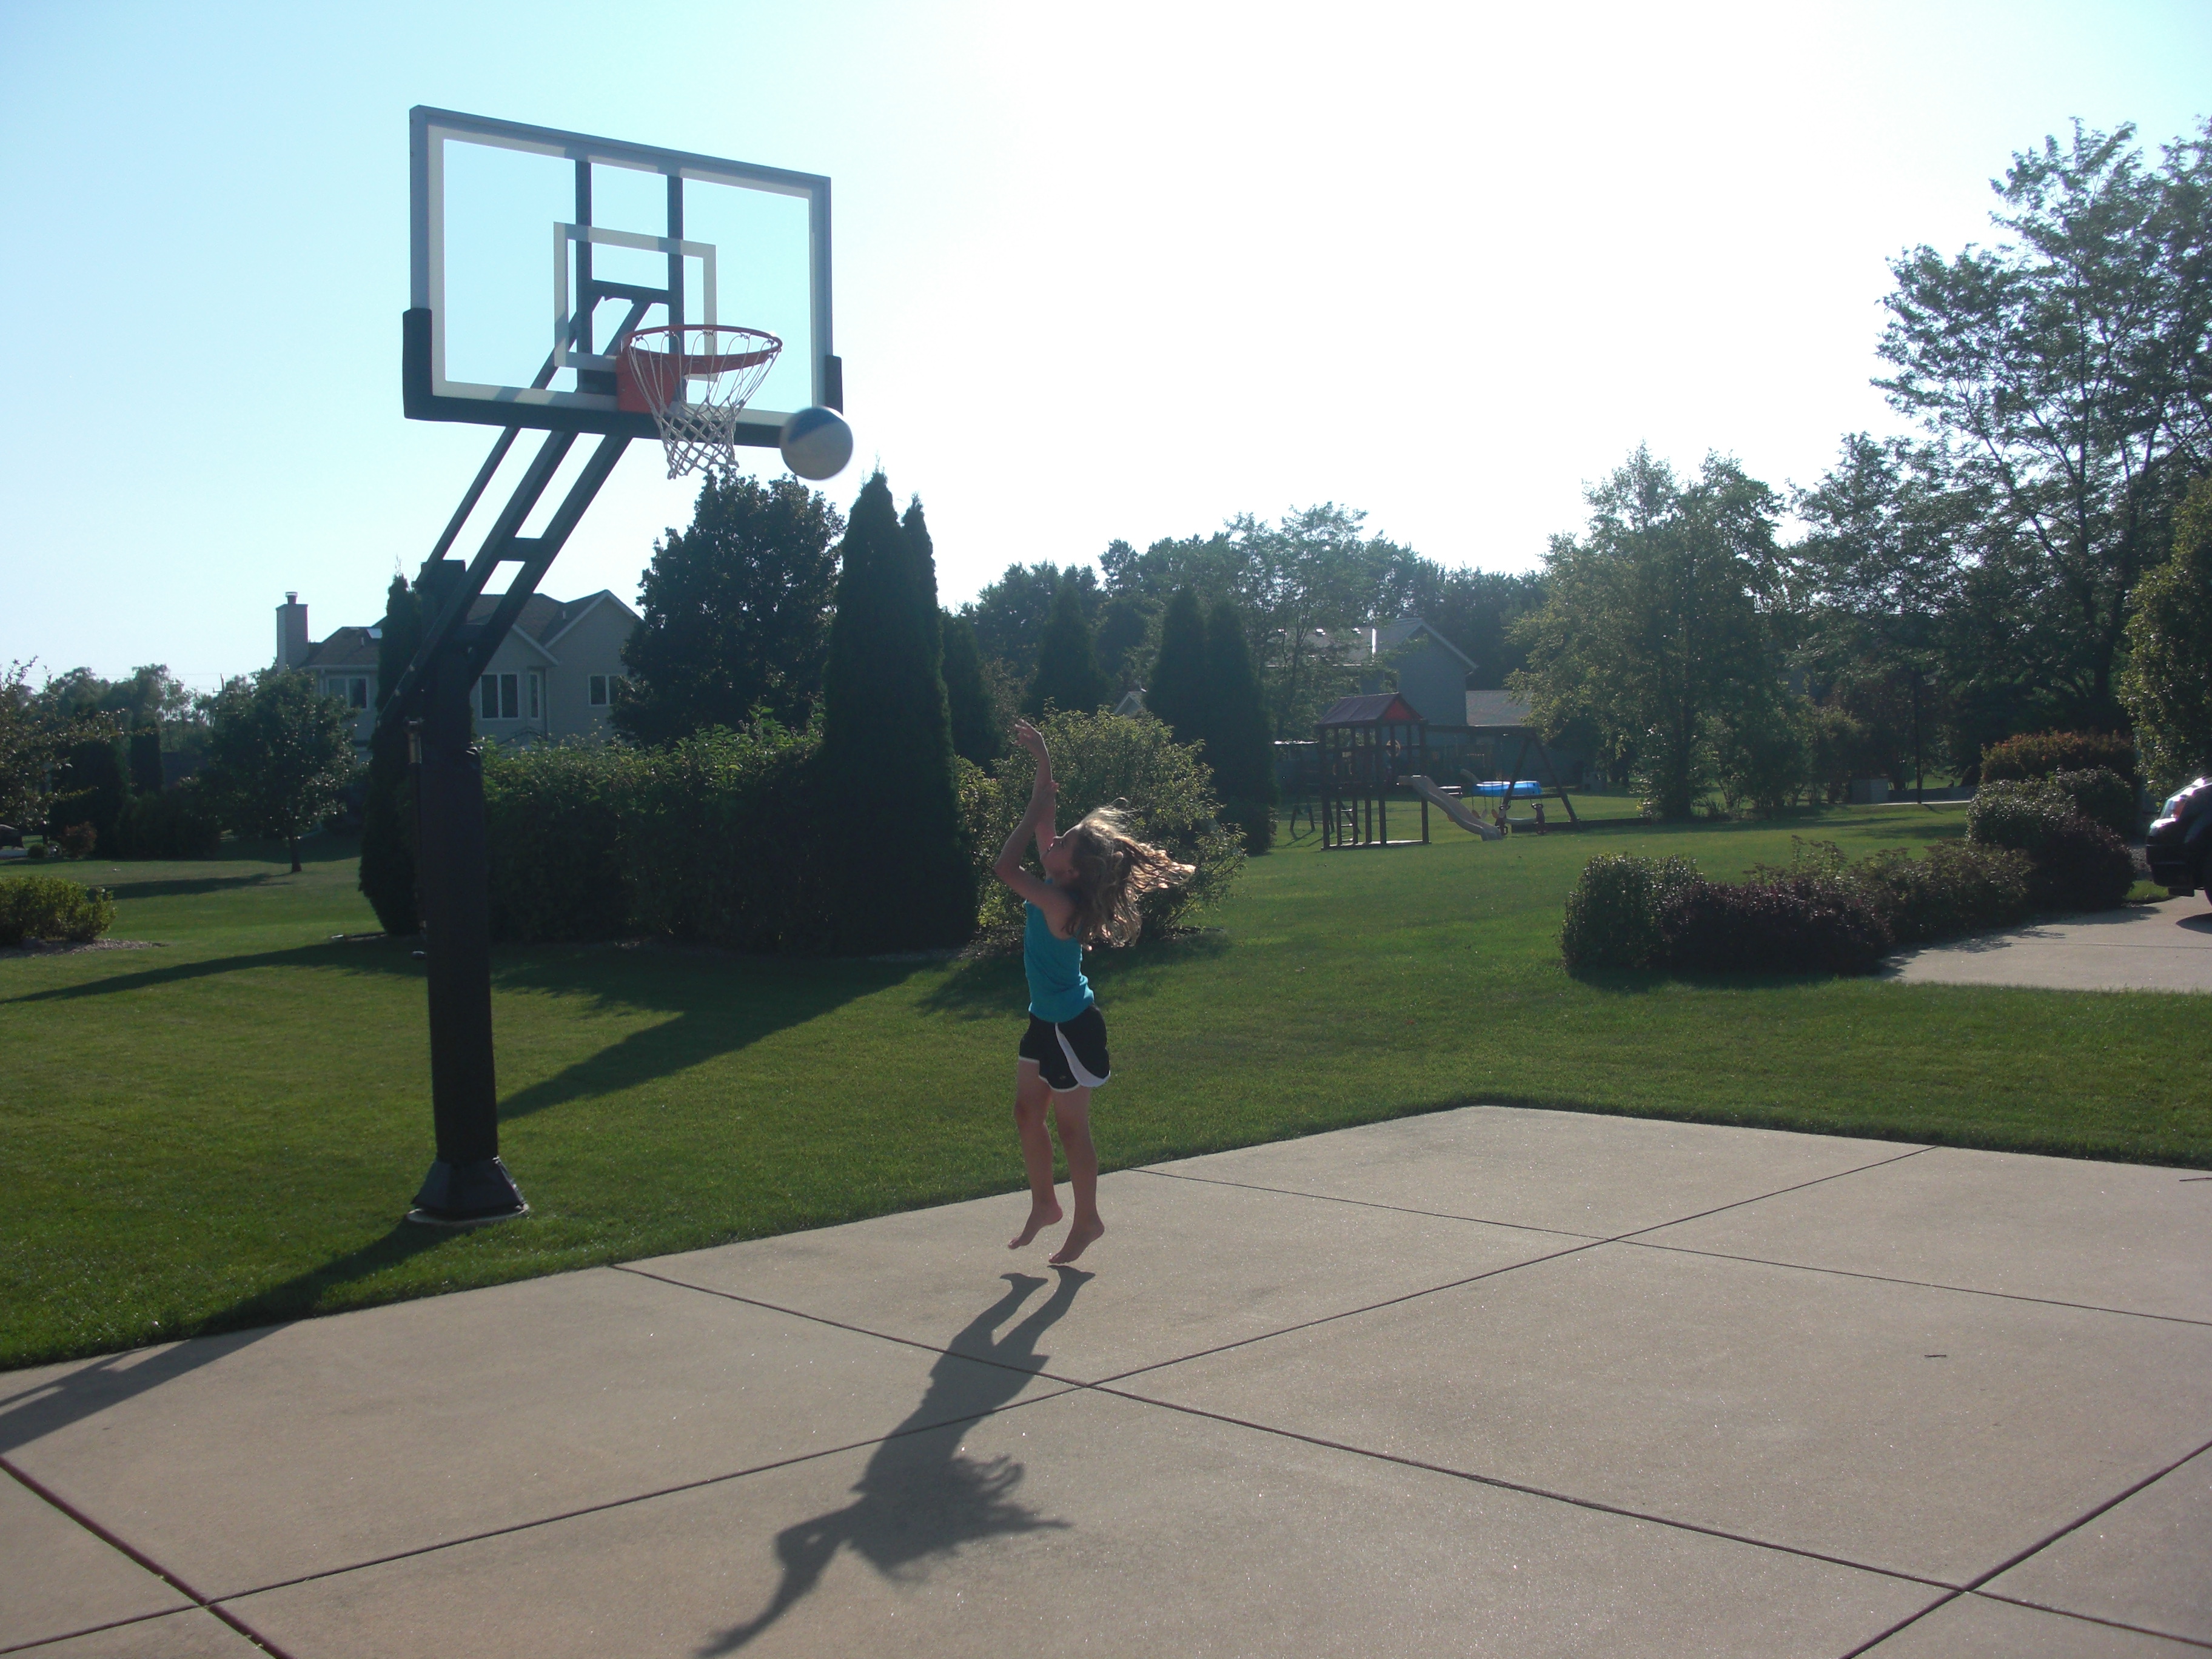 Third in a series of action photos of what looks to be a successful layup on a beautiful backyard basketball court.